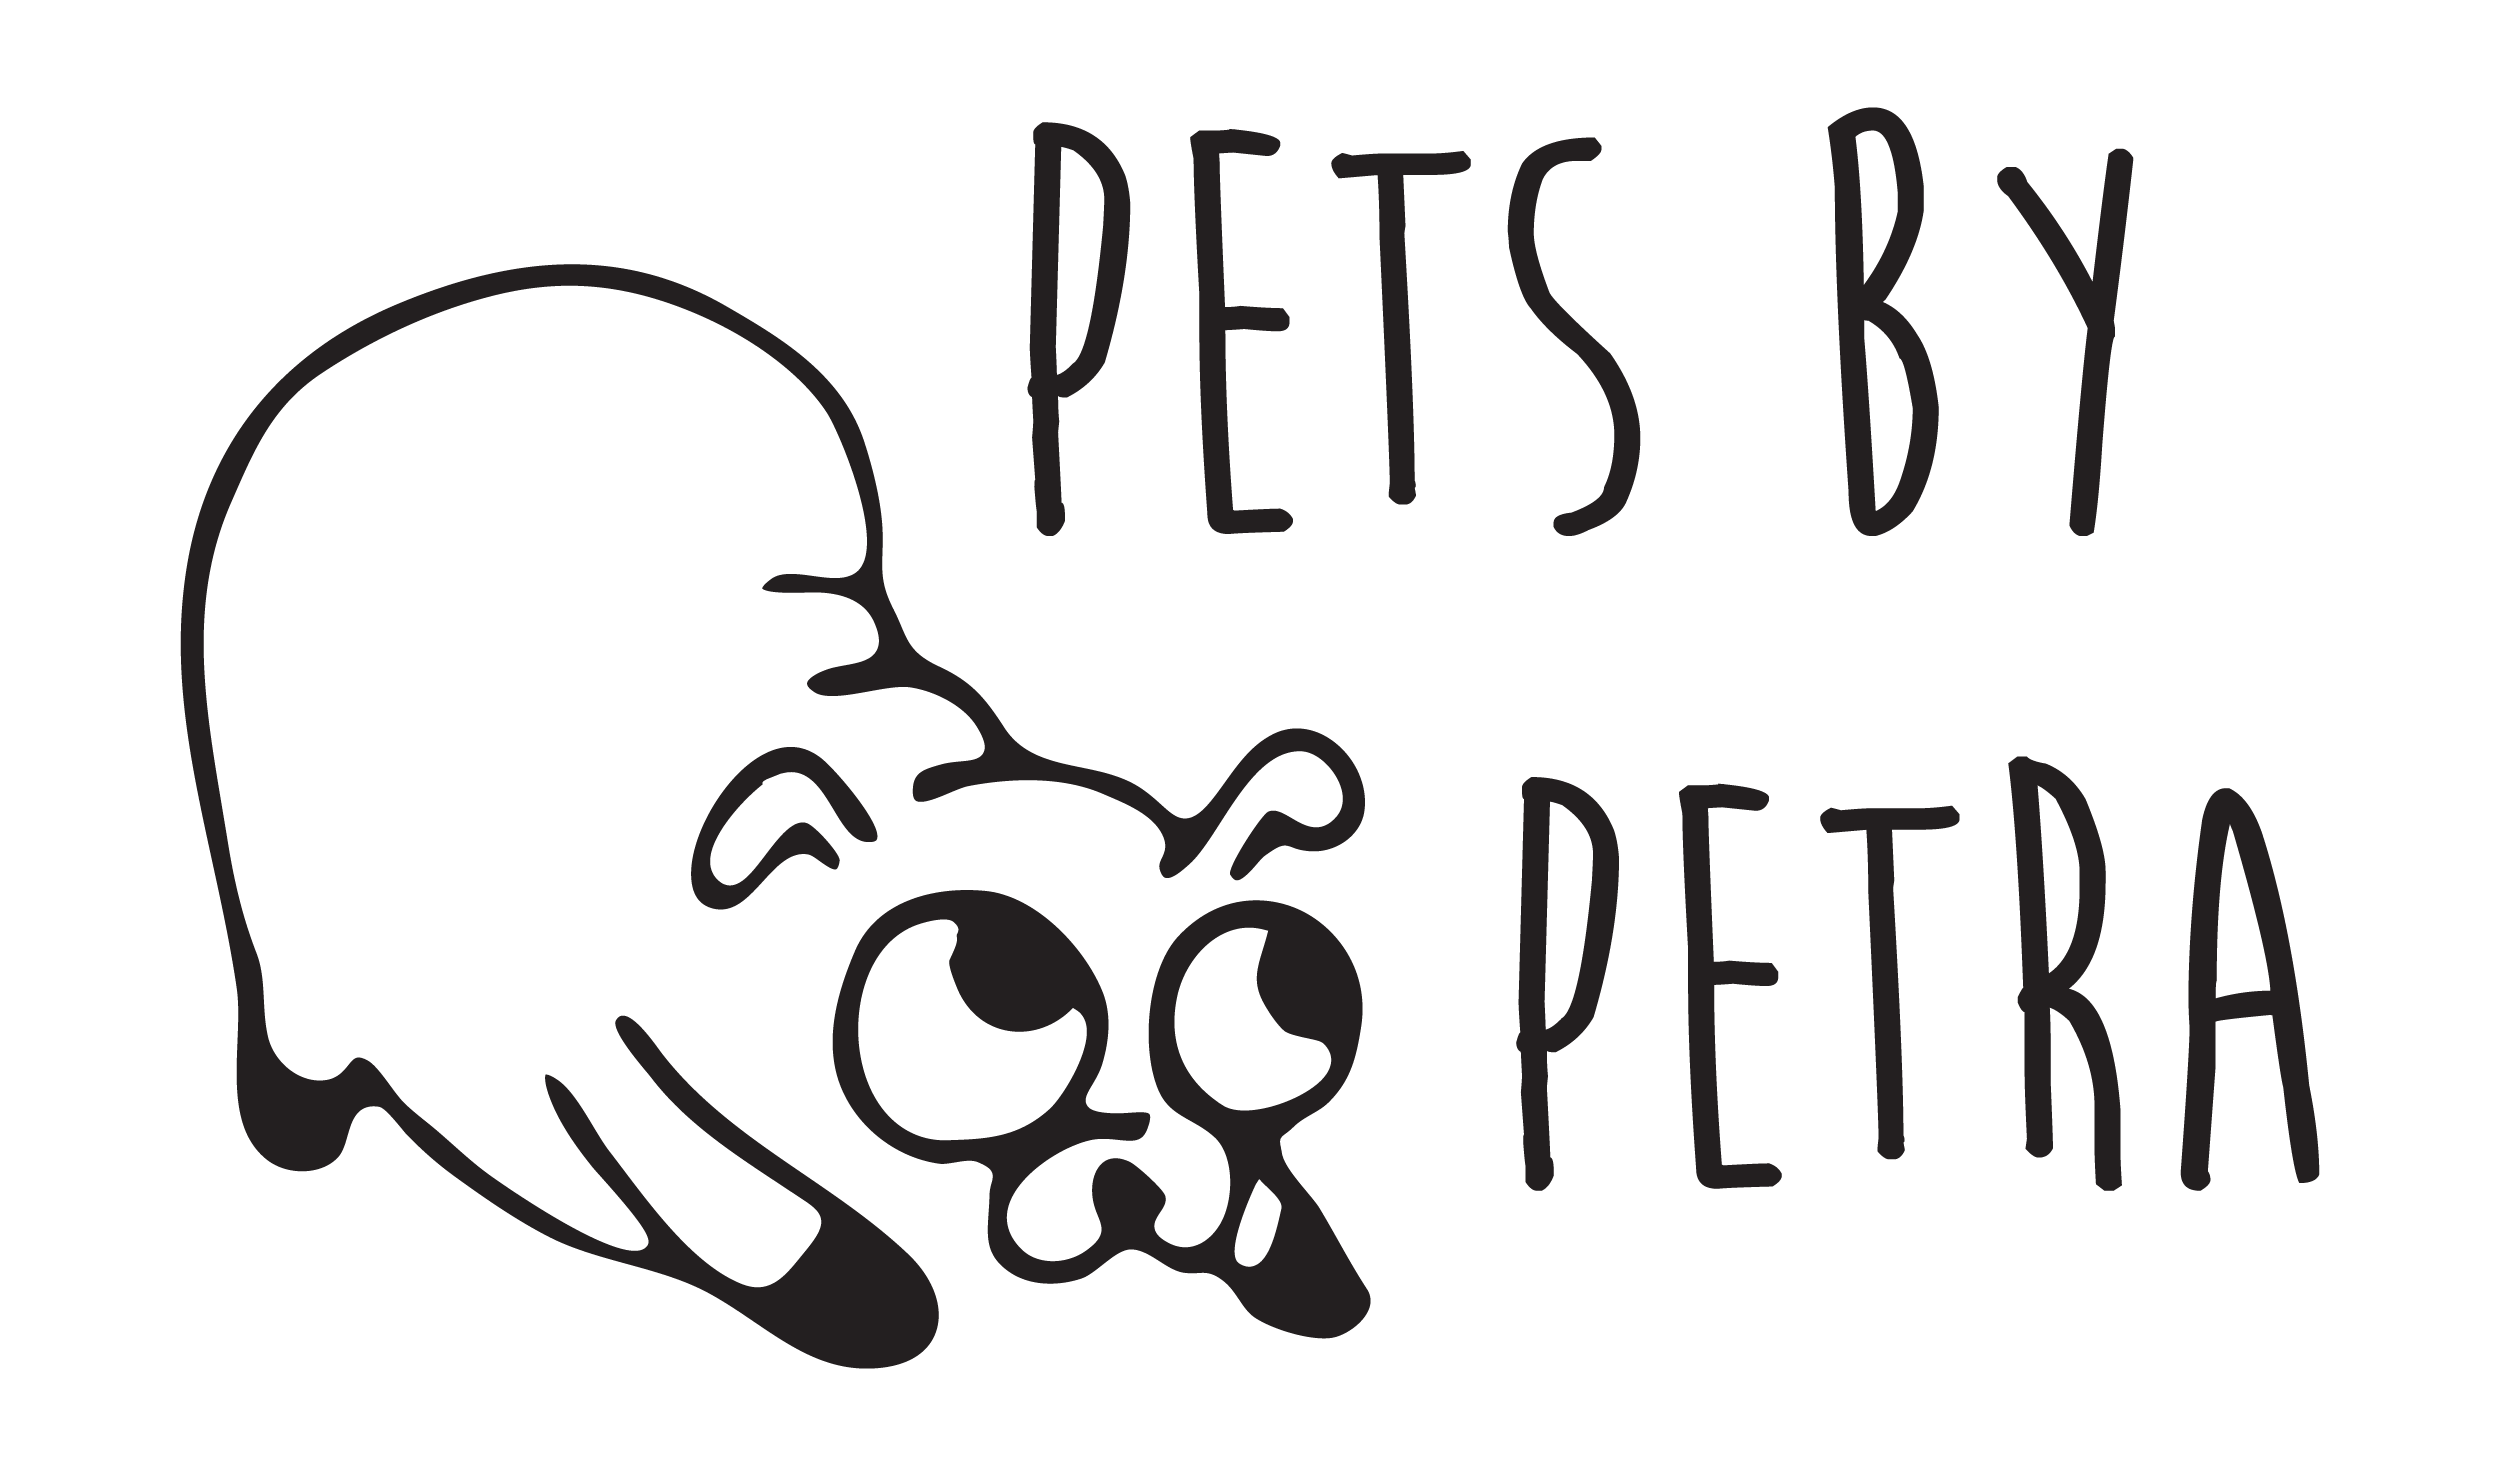 Pets by Petra